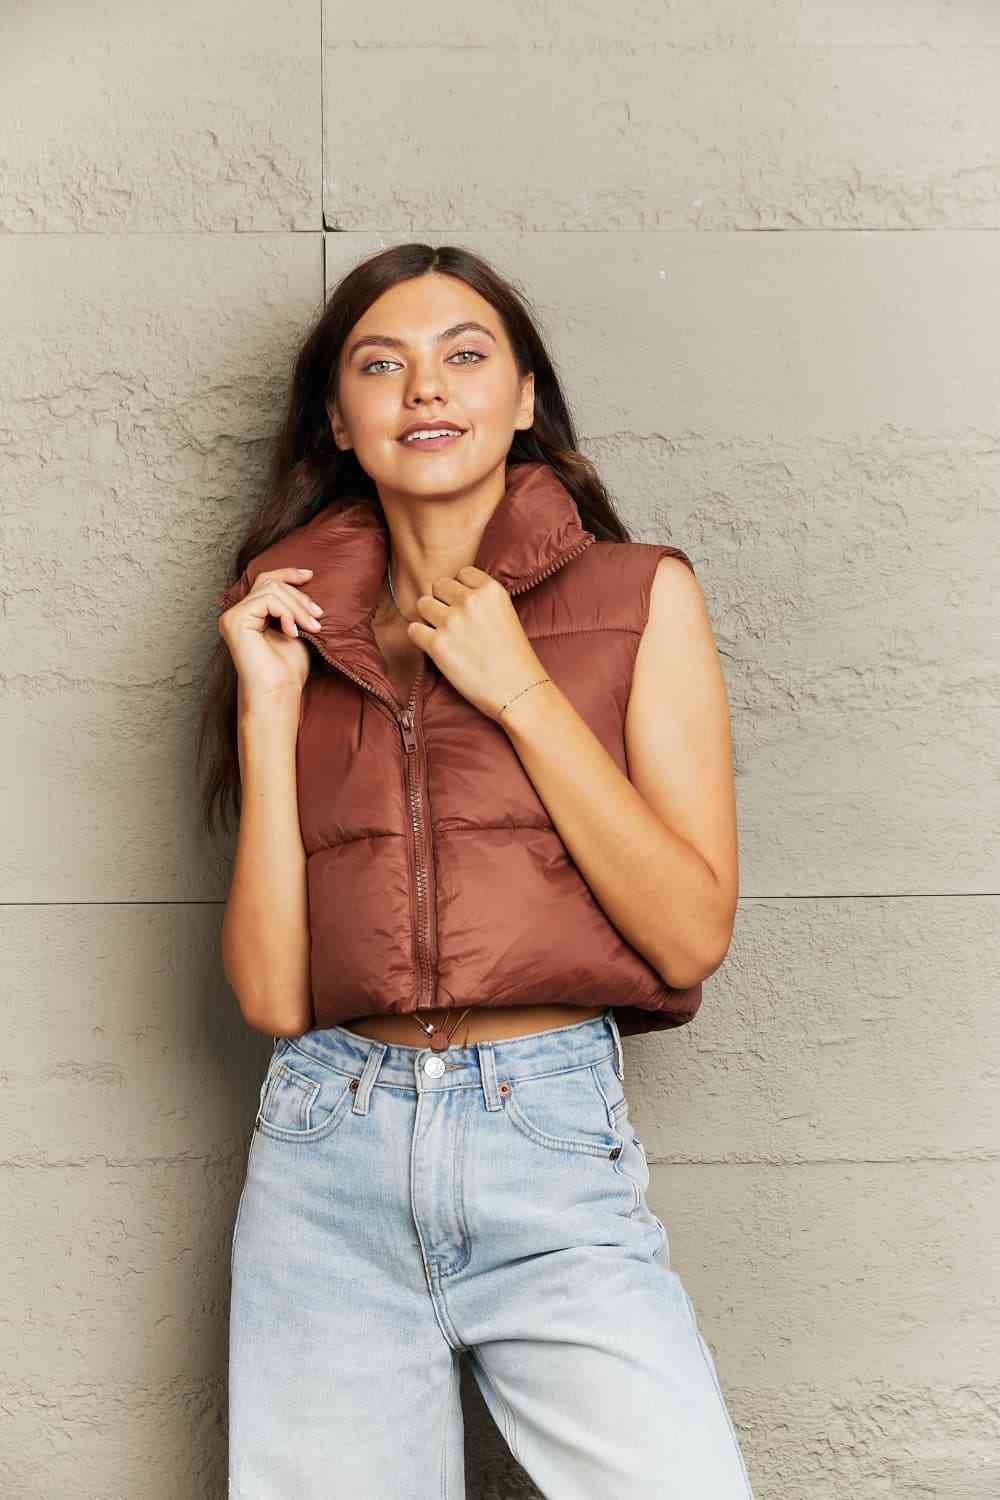 Zip-Up Drawstring Puffer Vest Zip-Up Drawstring Puffer Vest Stay cozy and stylish with this lightweight puffer vest – perfect for all of life's explorations! Be ready to take on the day (in style) with this wardrobe essential. Pattern type: Solid Style: C